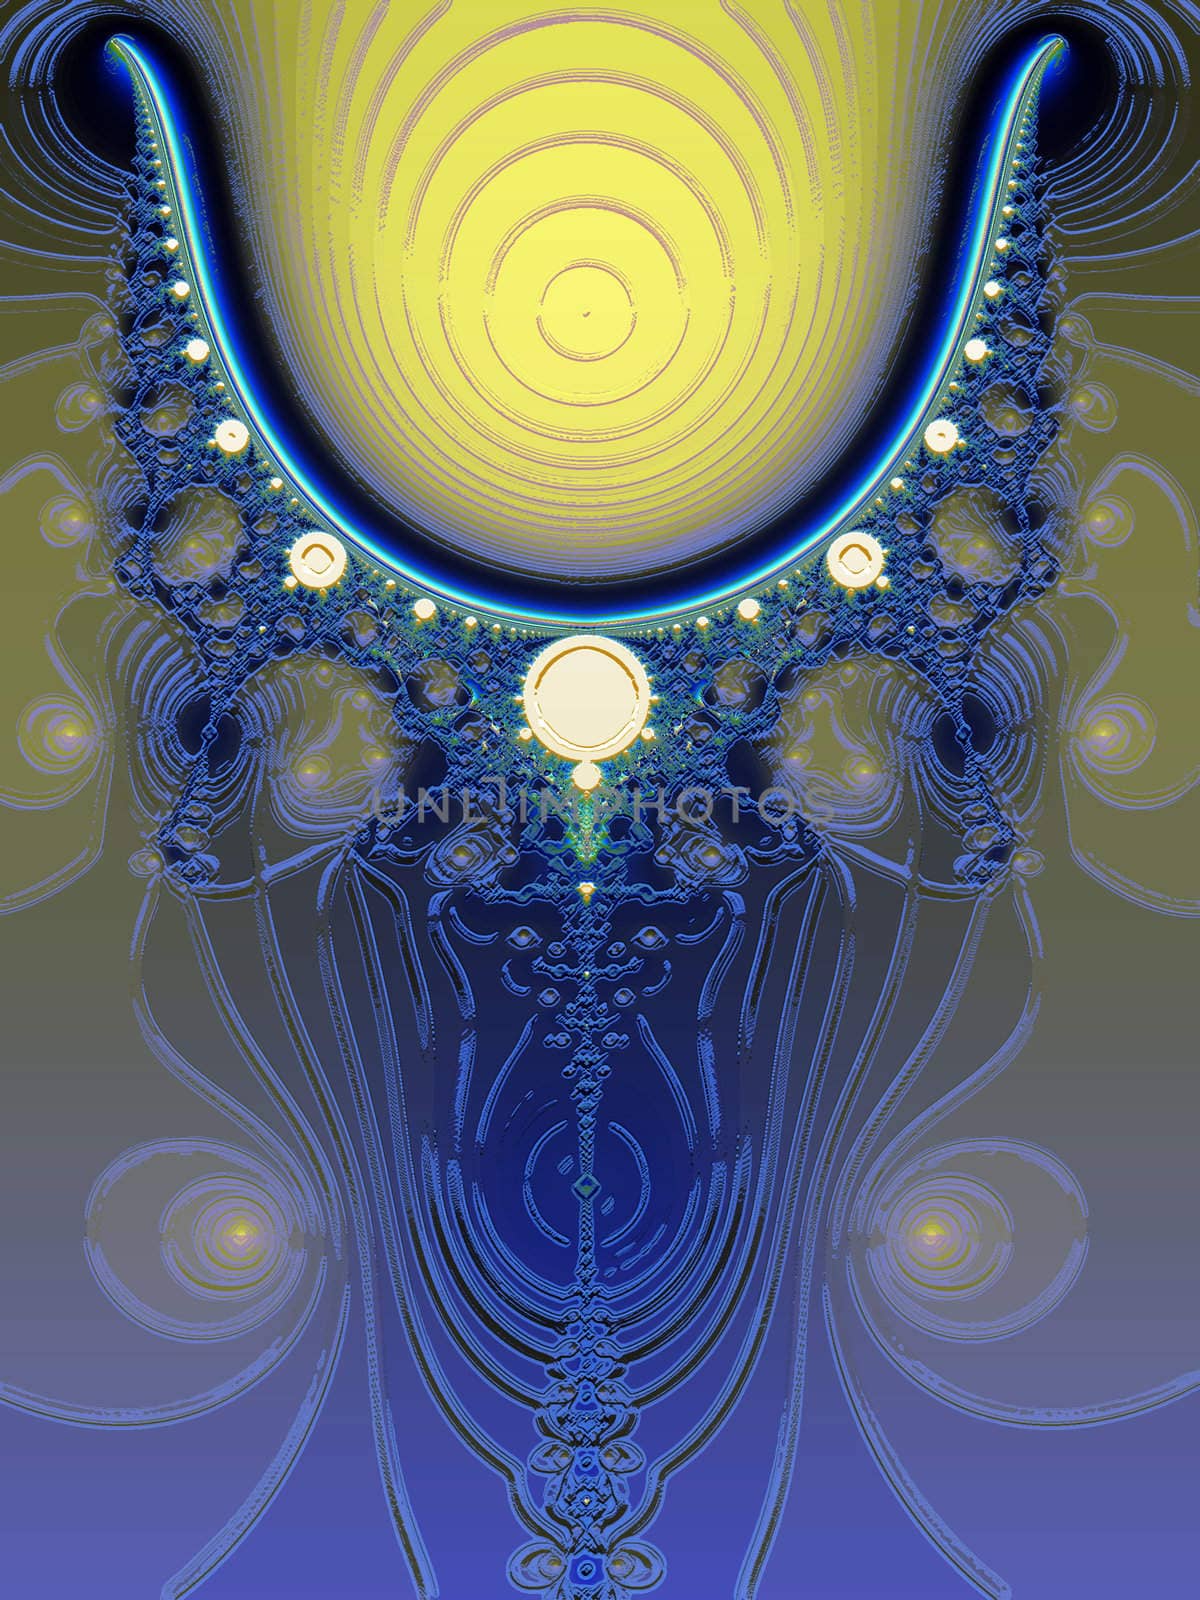 Glowing Blue and Yellow Fractal Design by bobbigmac